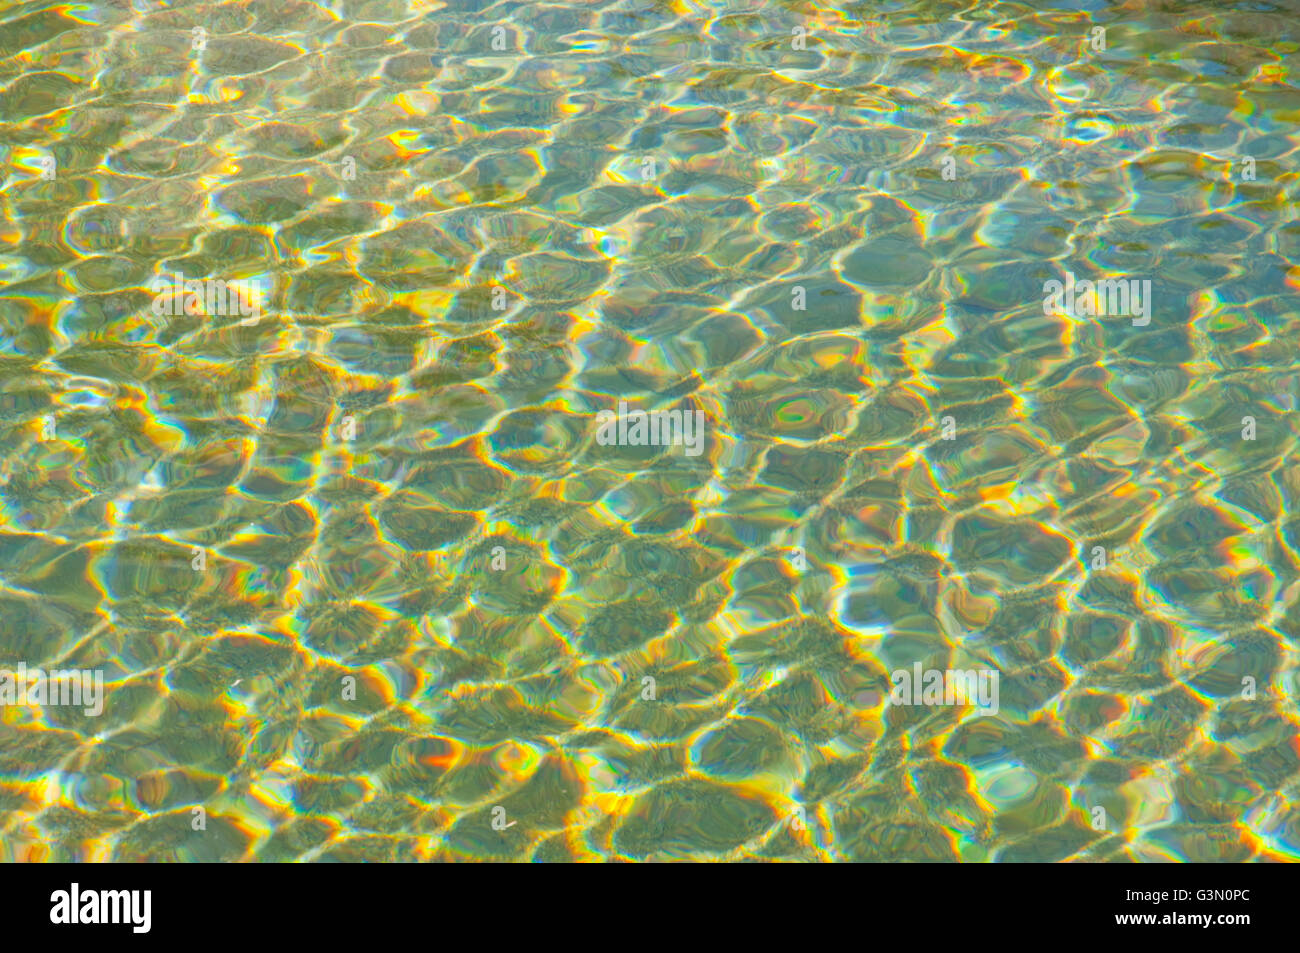 Water background. Stock Photo